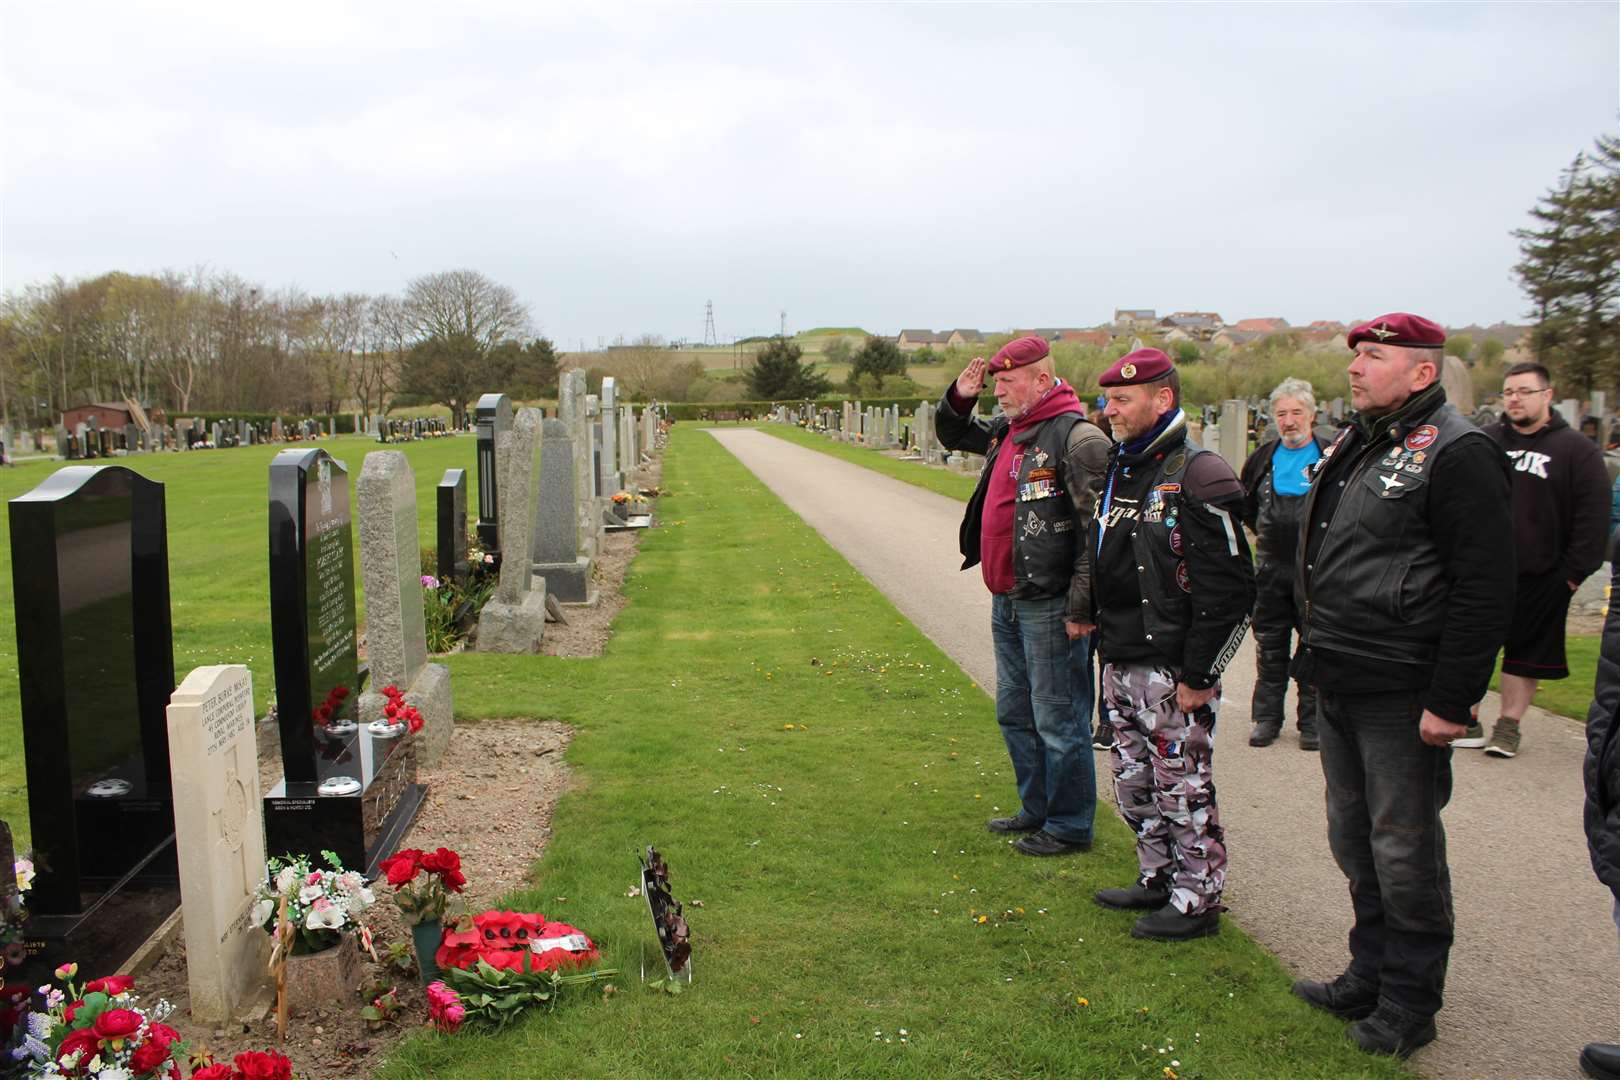 A small ceremony was held at the grave of Peter Burke McKay.